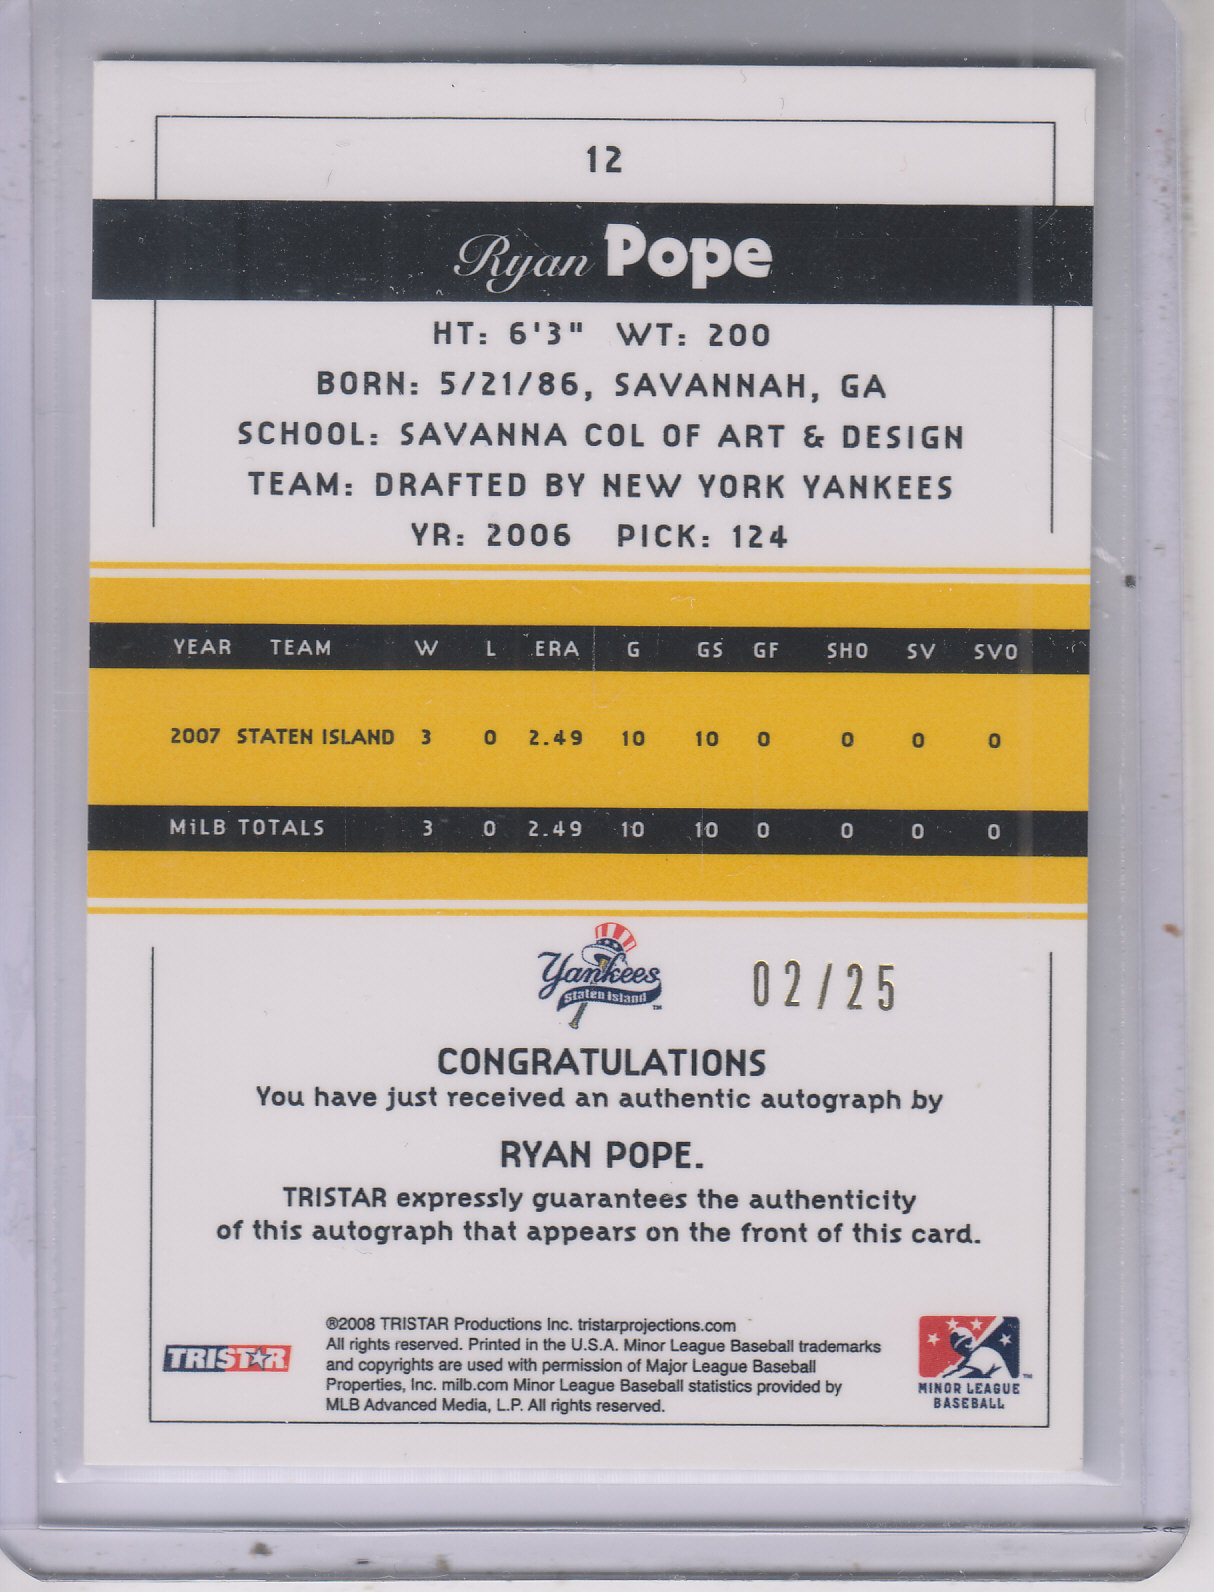 2008 TRISTAR PROjections Autographs Yellow #12 Ryan Pope back image